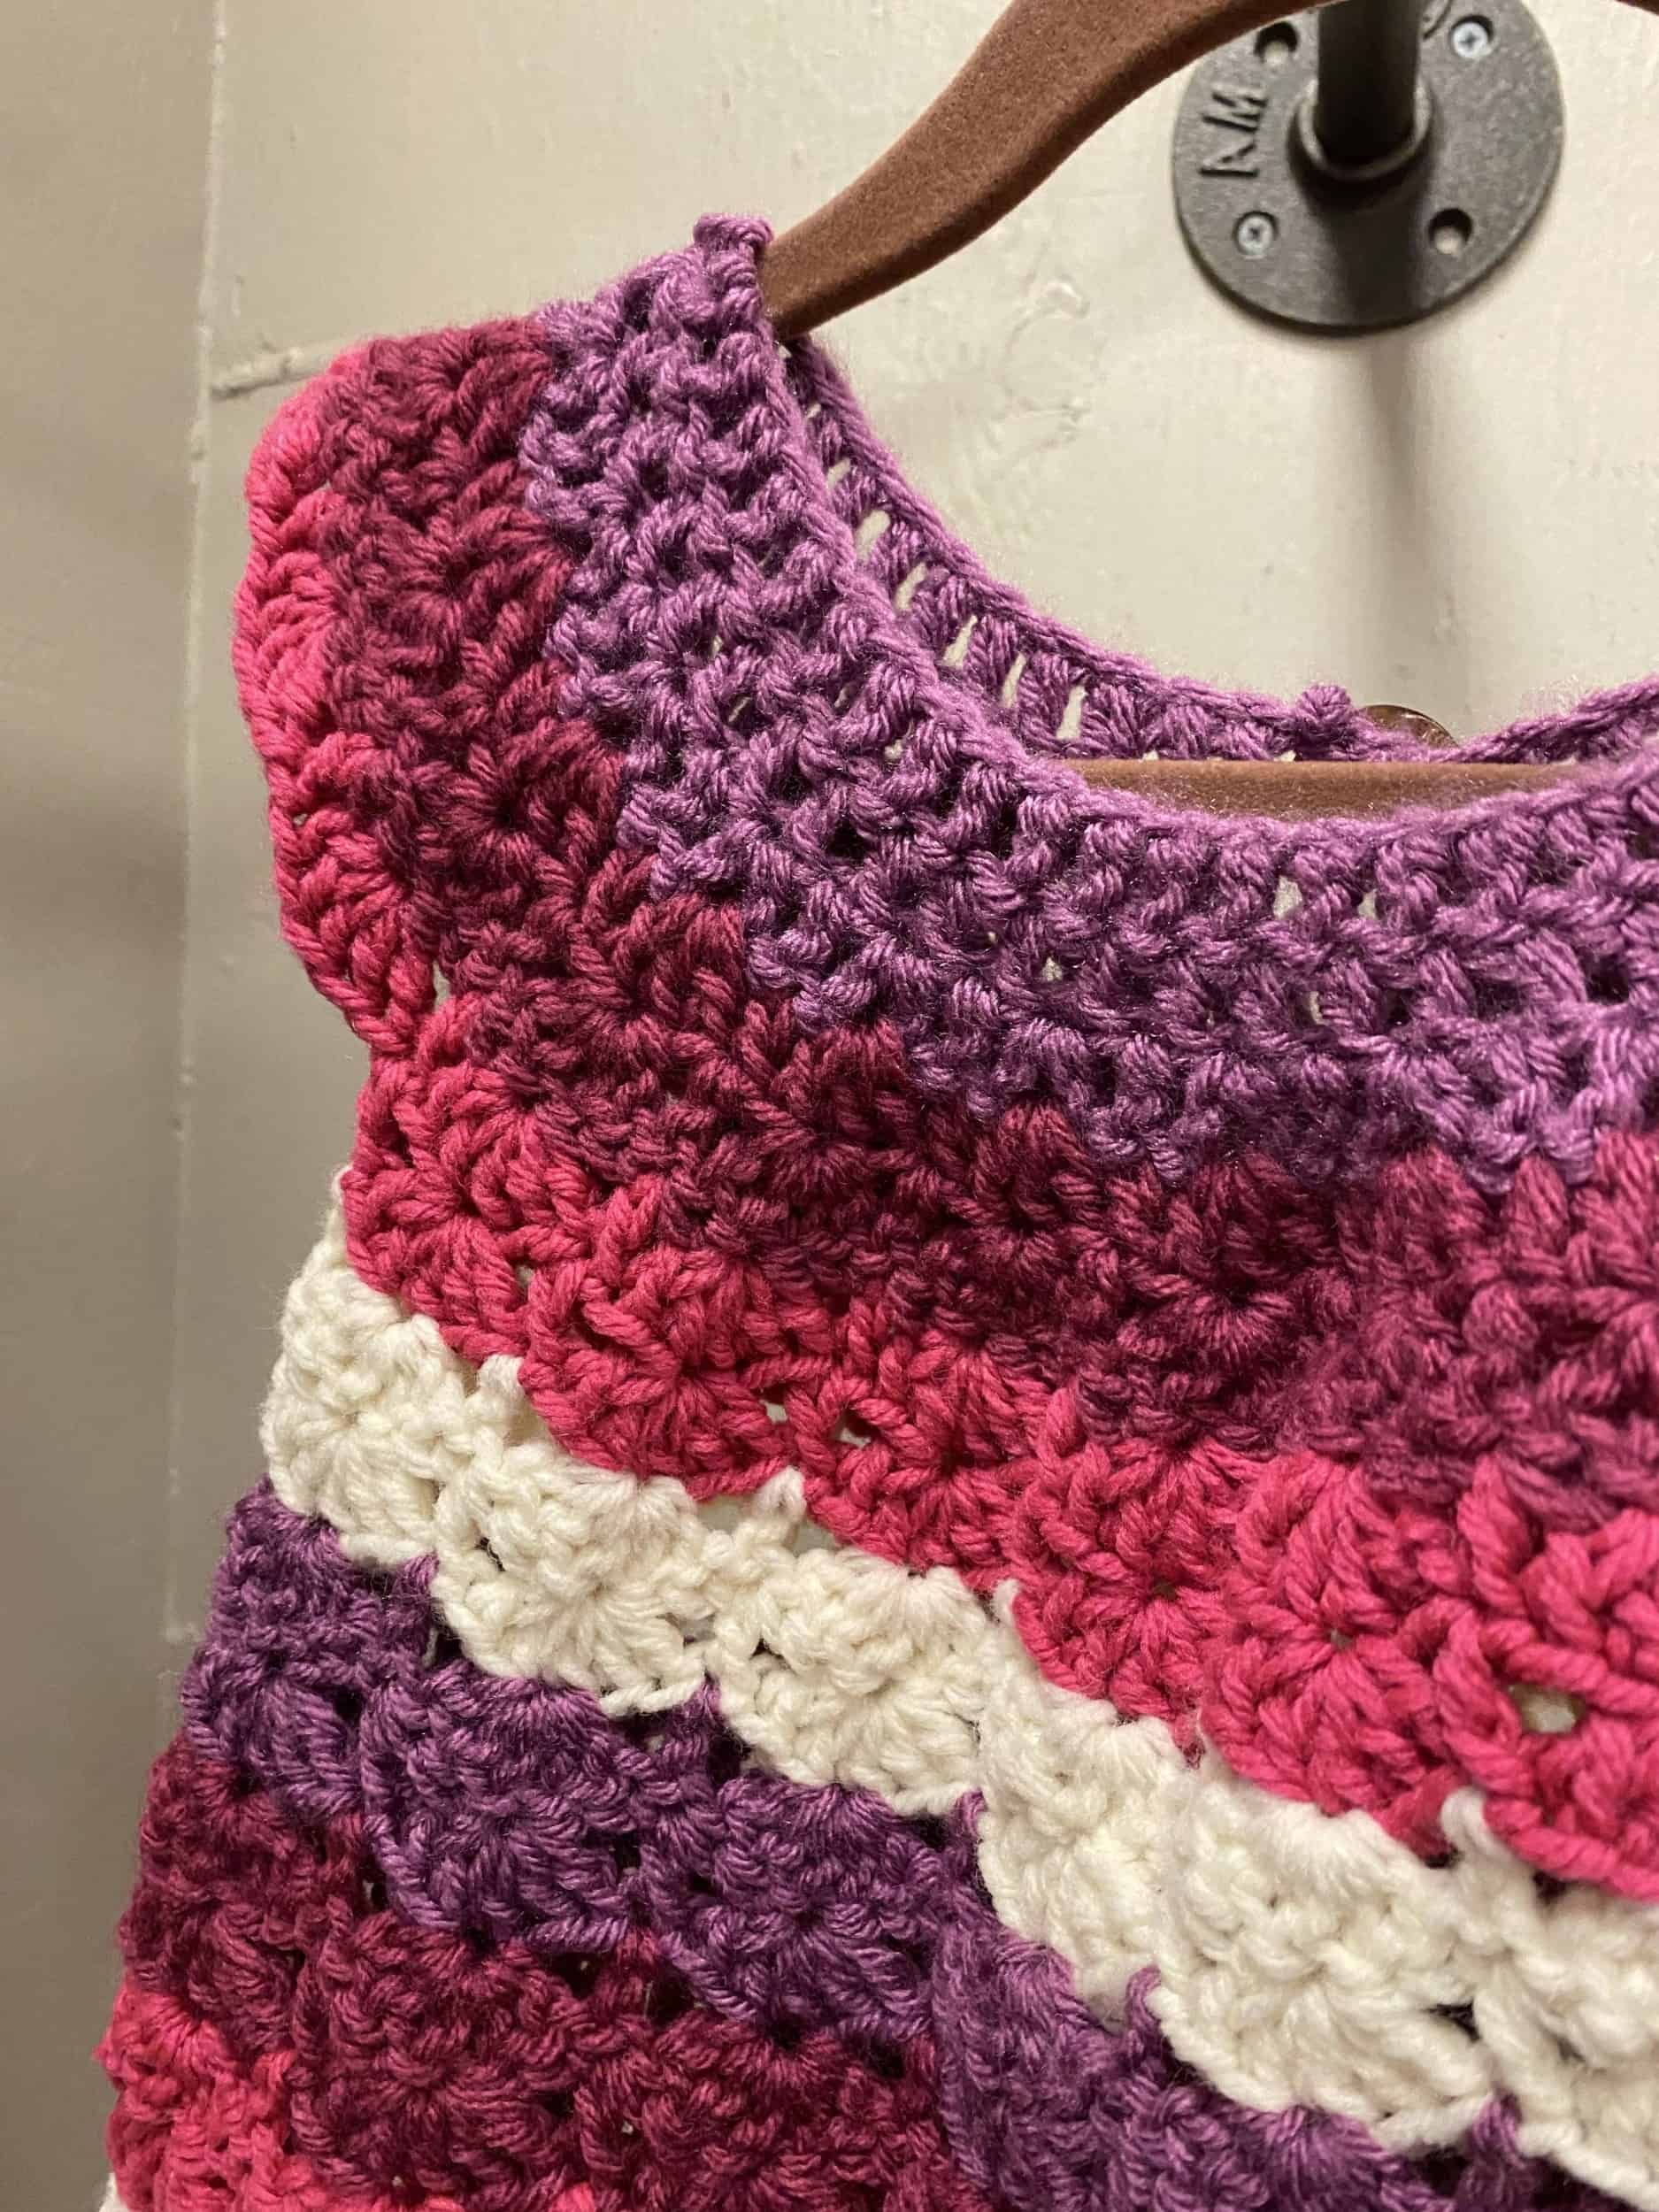 This Toddlers Pink/Purple Dress is made with love by Classy Crafty Wife! Shop more unique gift ideas today with Spots Initiatives, the best way to support creators.